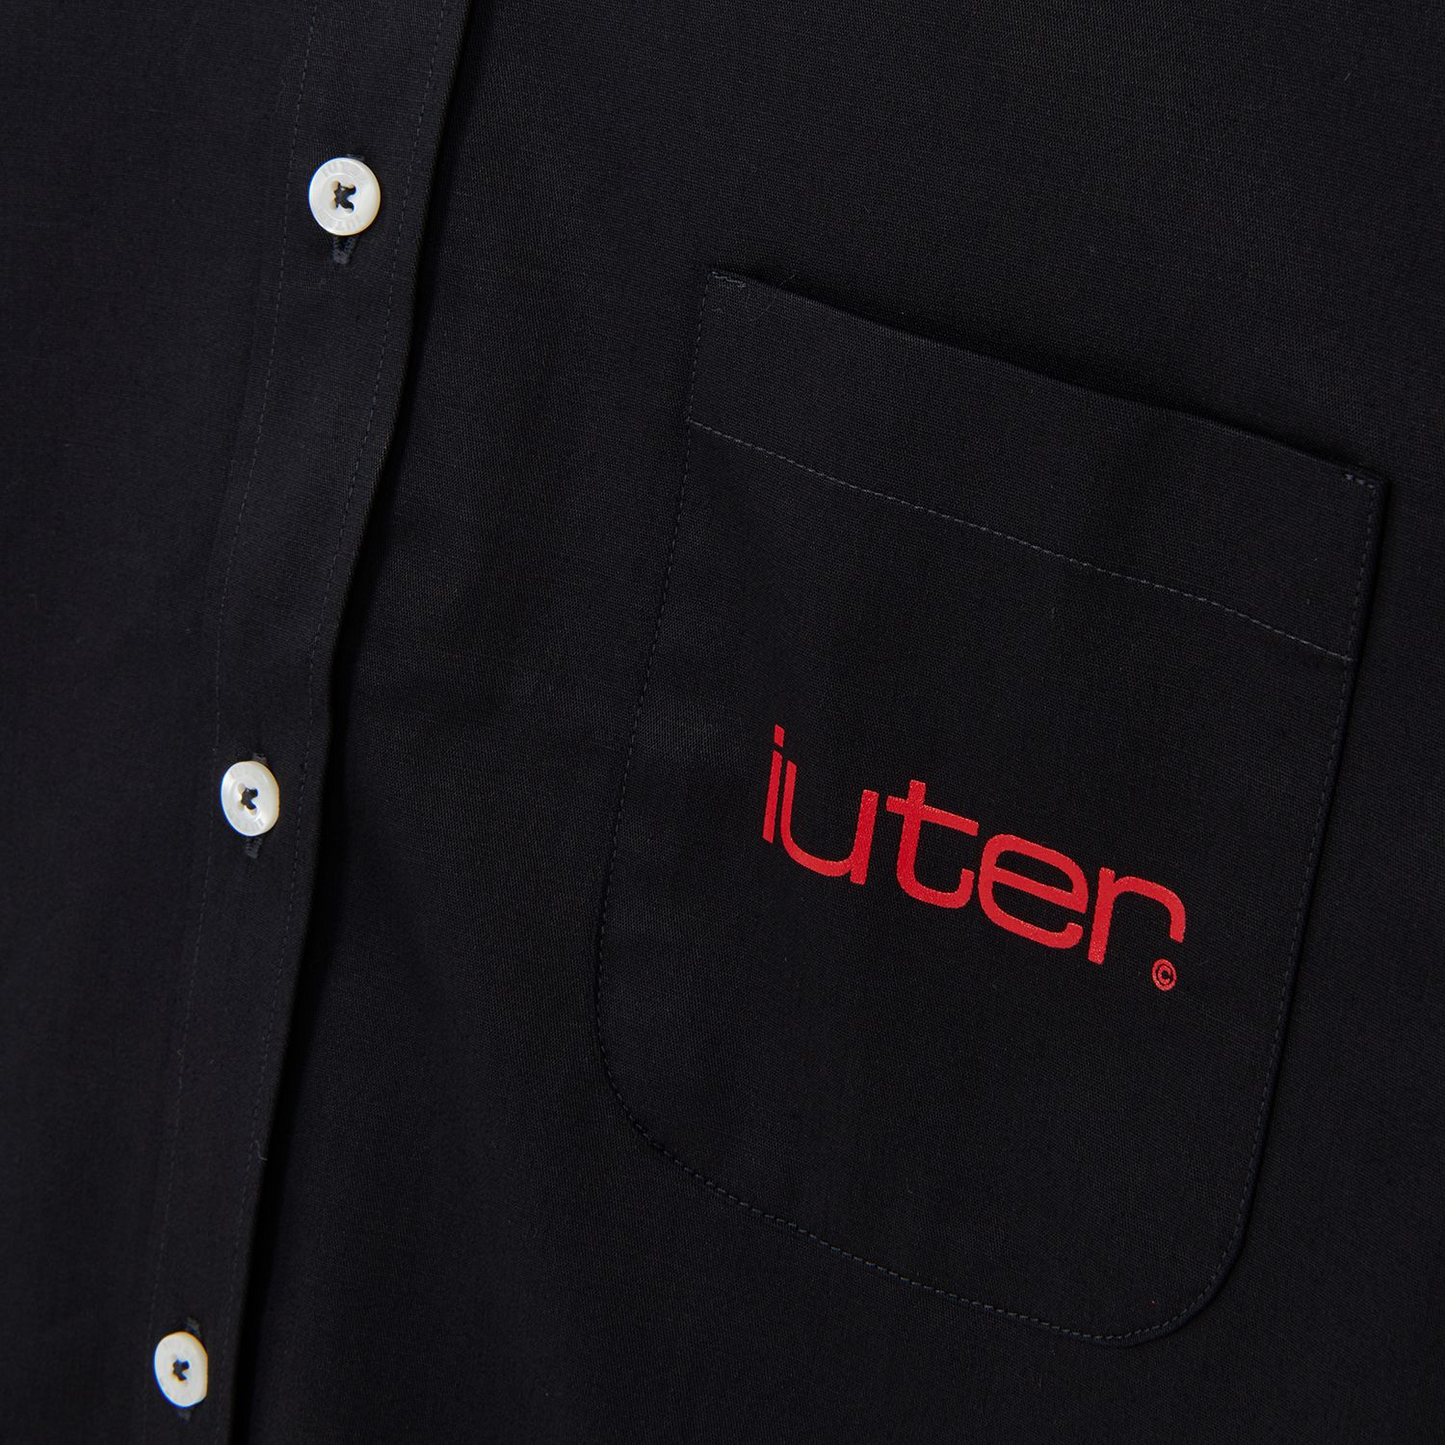 IUTER GRID S/S SHIRT - deviceone